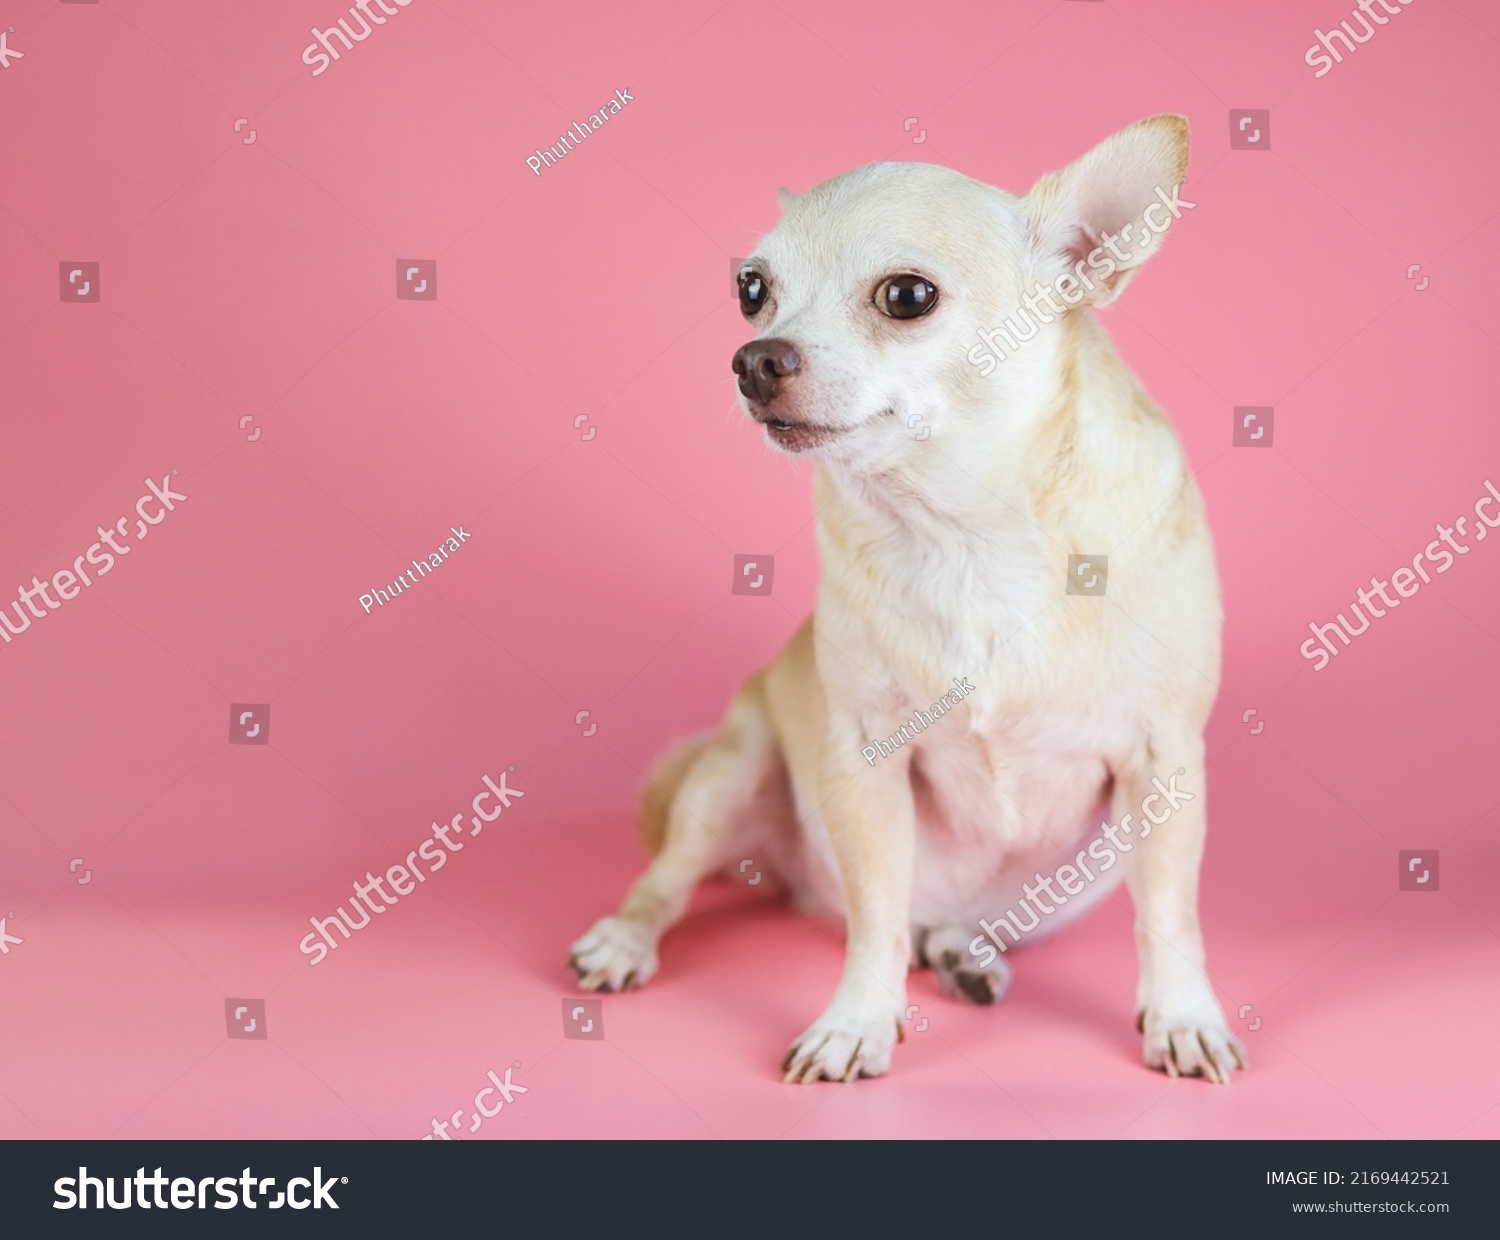 Stock Photo Portrait Of Fat Brown Short Hair Chihuahua Dog Sitting On Pink Background With Copy Space 2169442521 